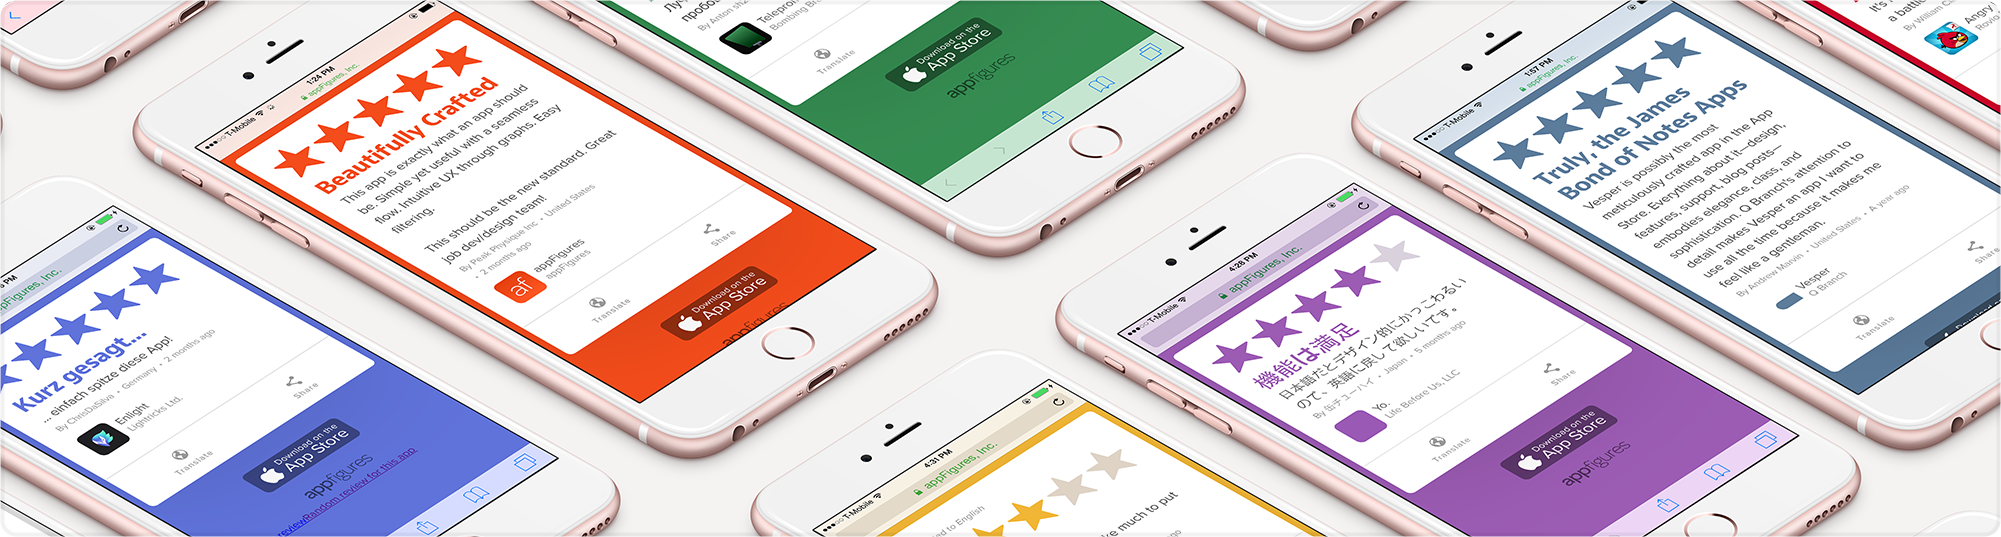 App store reviews are easy to share with Review Cards from appFigures